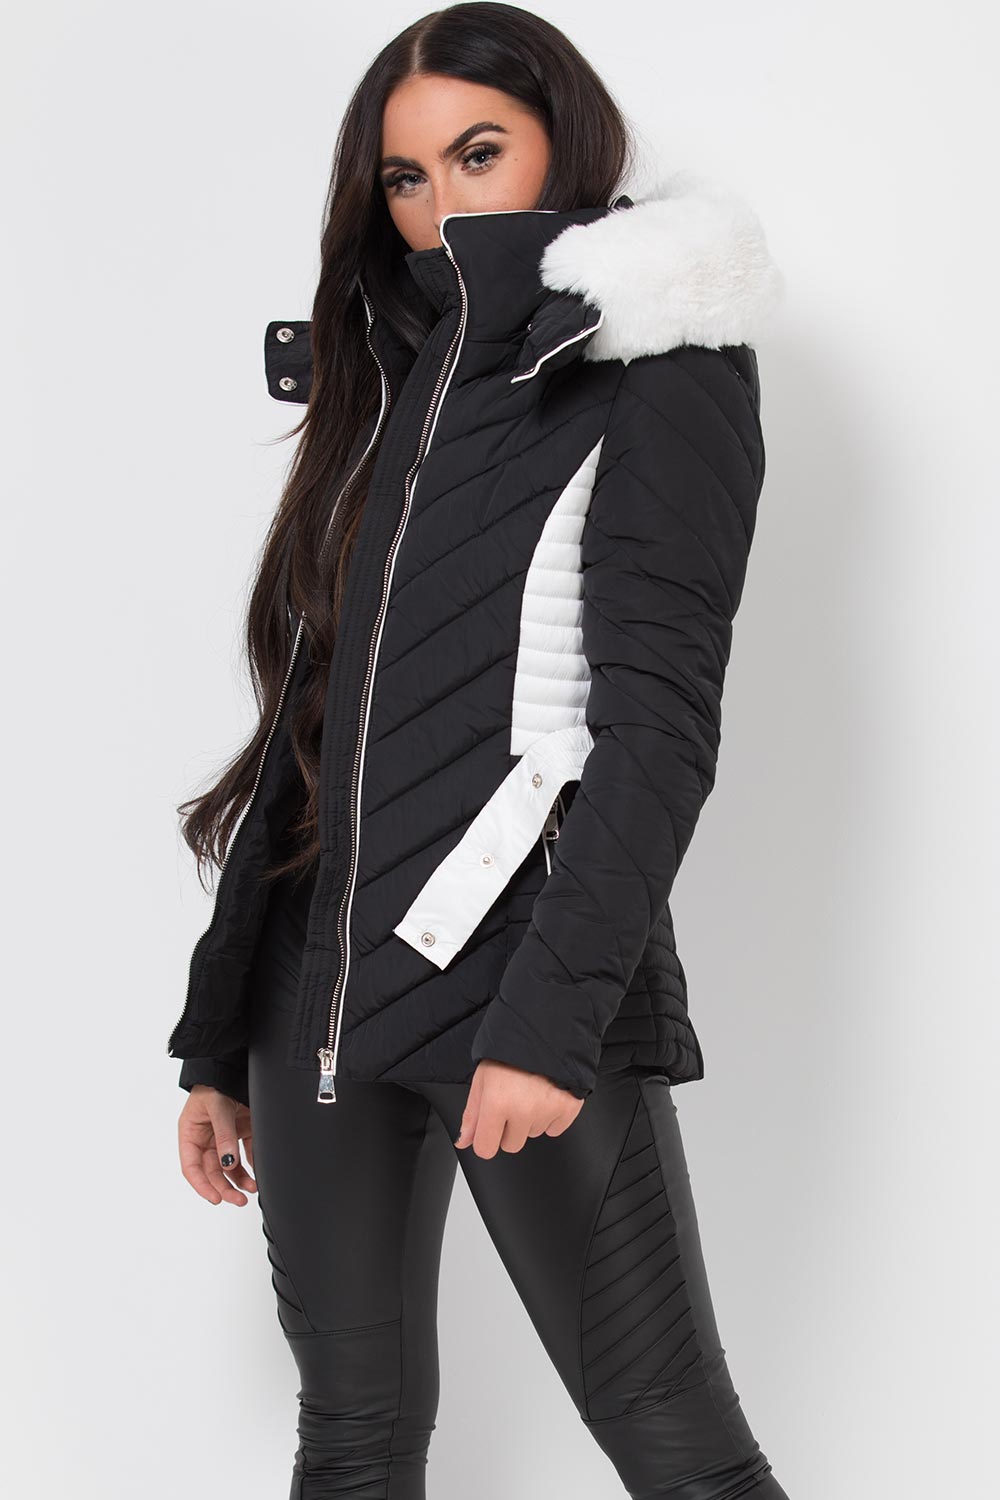 puffer jacket black and white